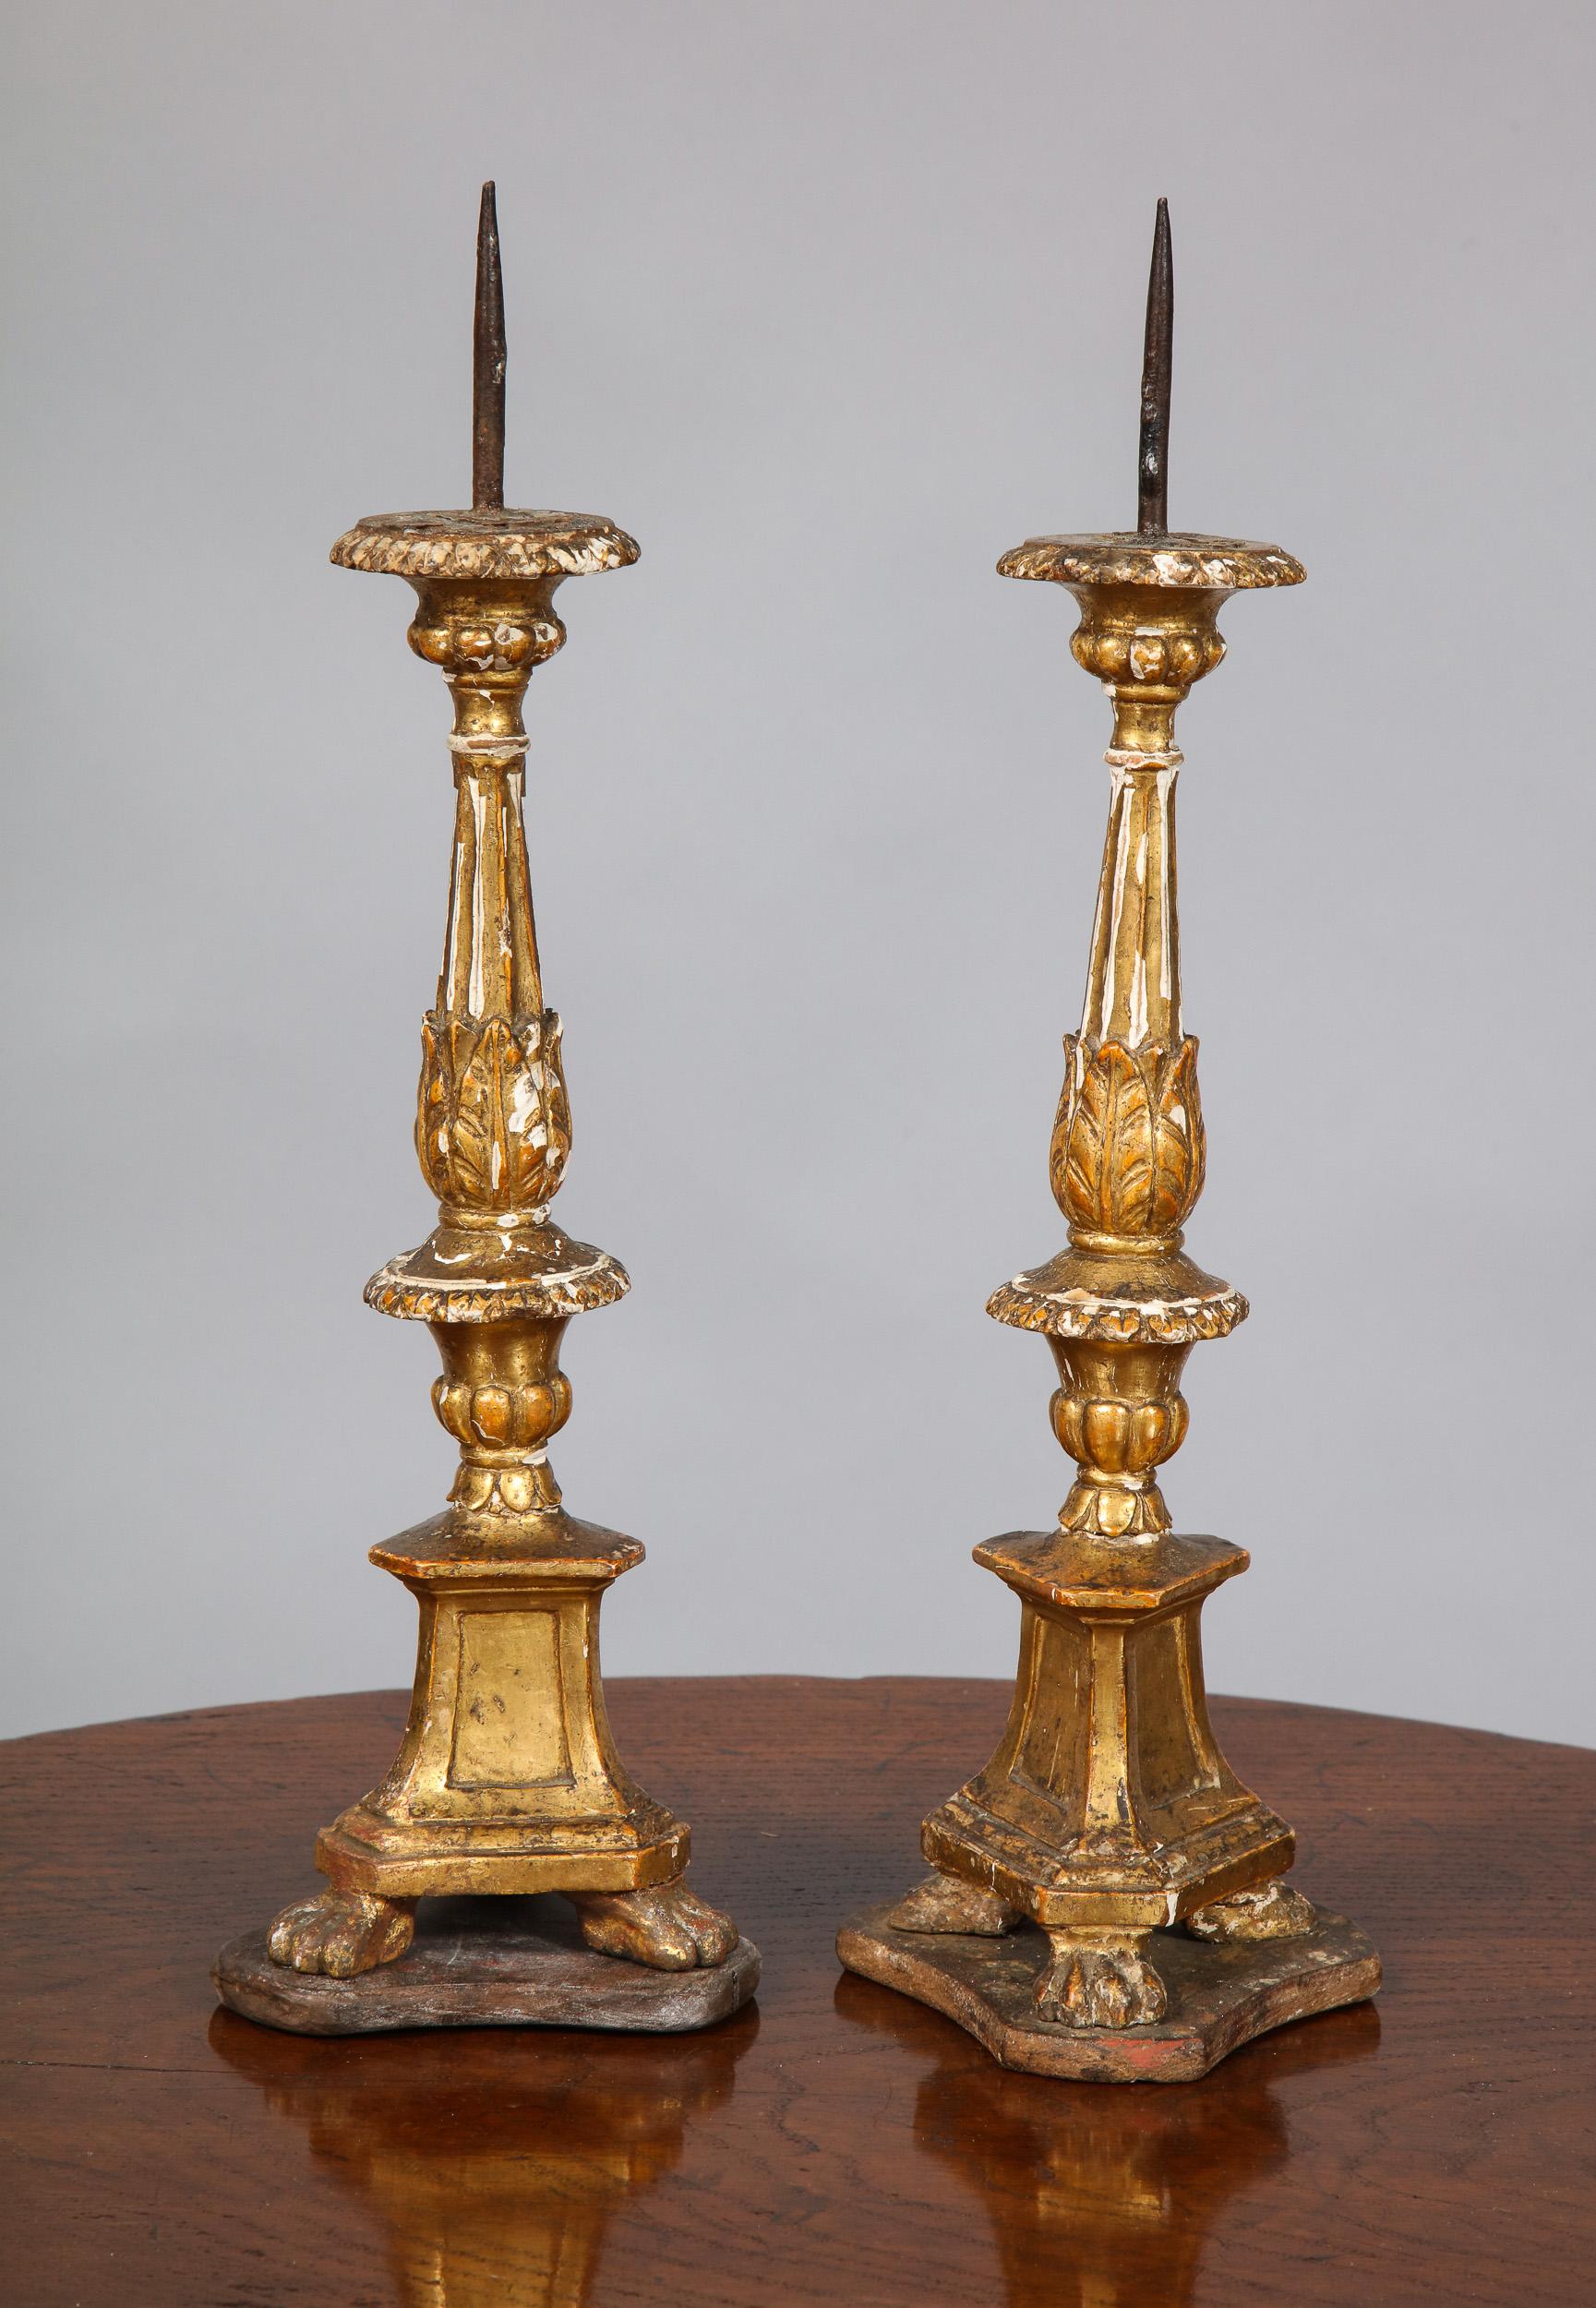 Fine pair of 18th century Italian giltwood pricket candlesticks with original water gilt decoration having foliate carving, fluted shafts and standing on platformed paw feet, in 